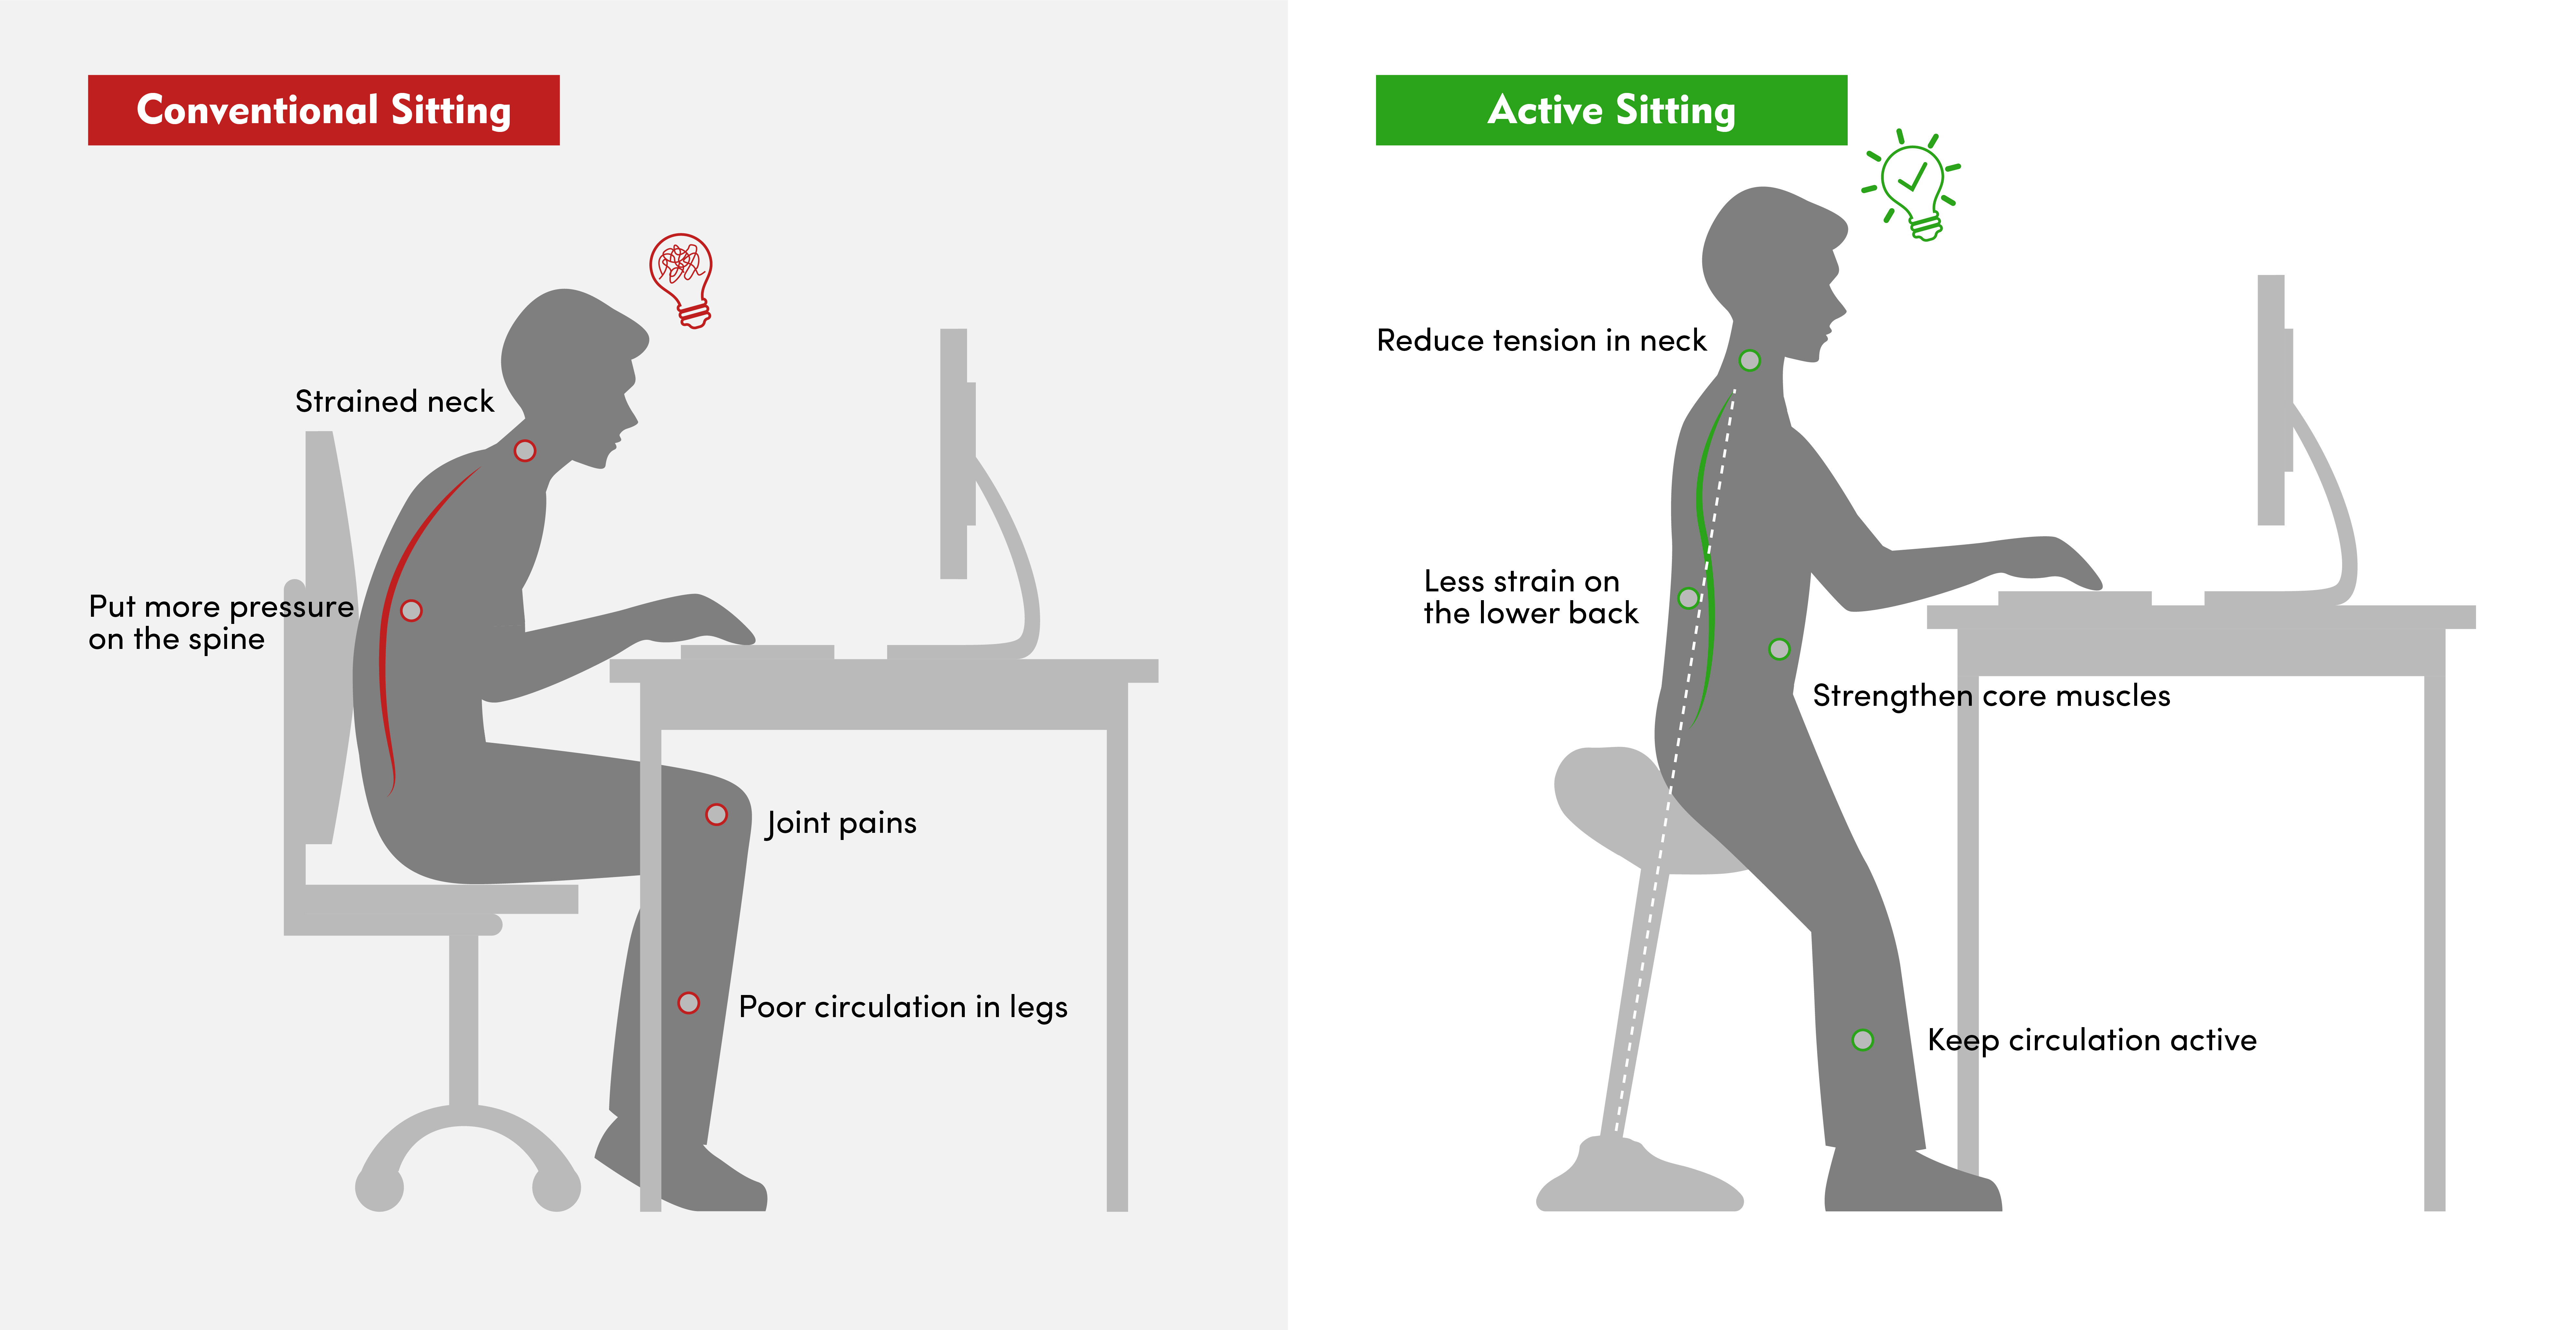 Conventional Sitting VS. Active Sitting